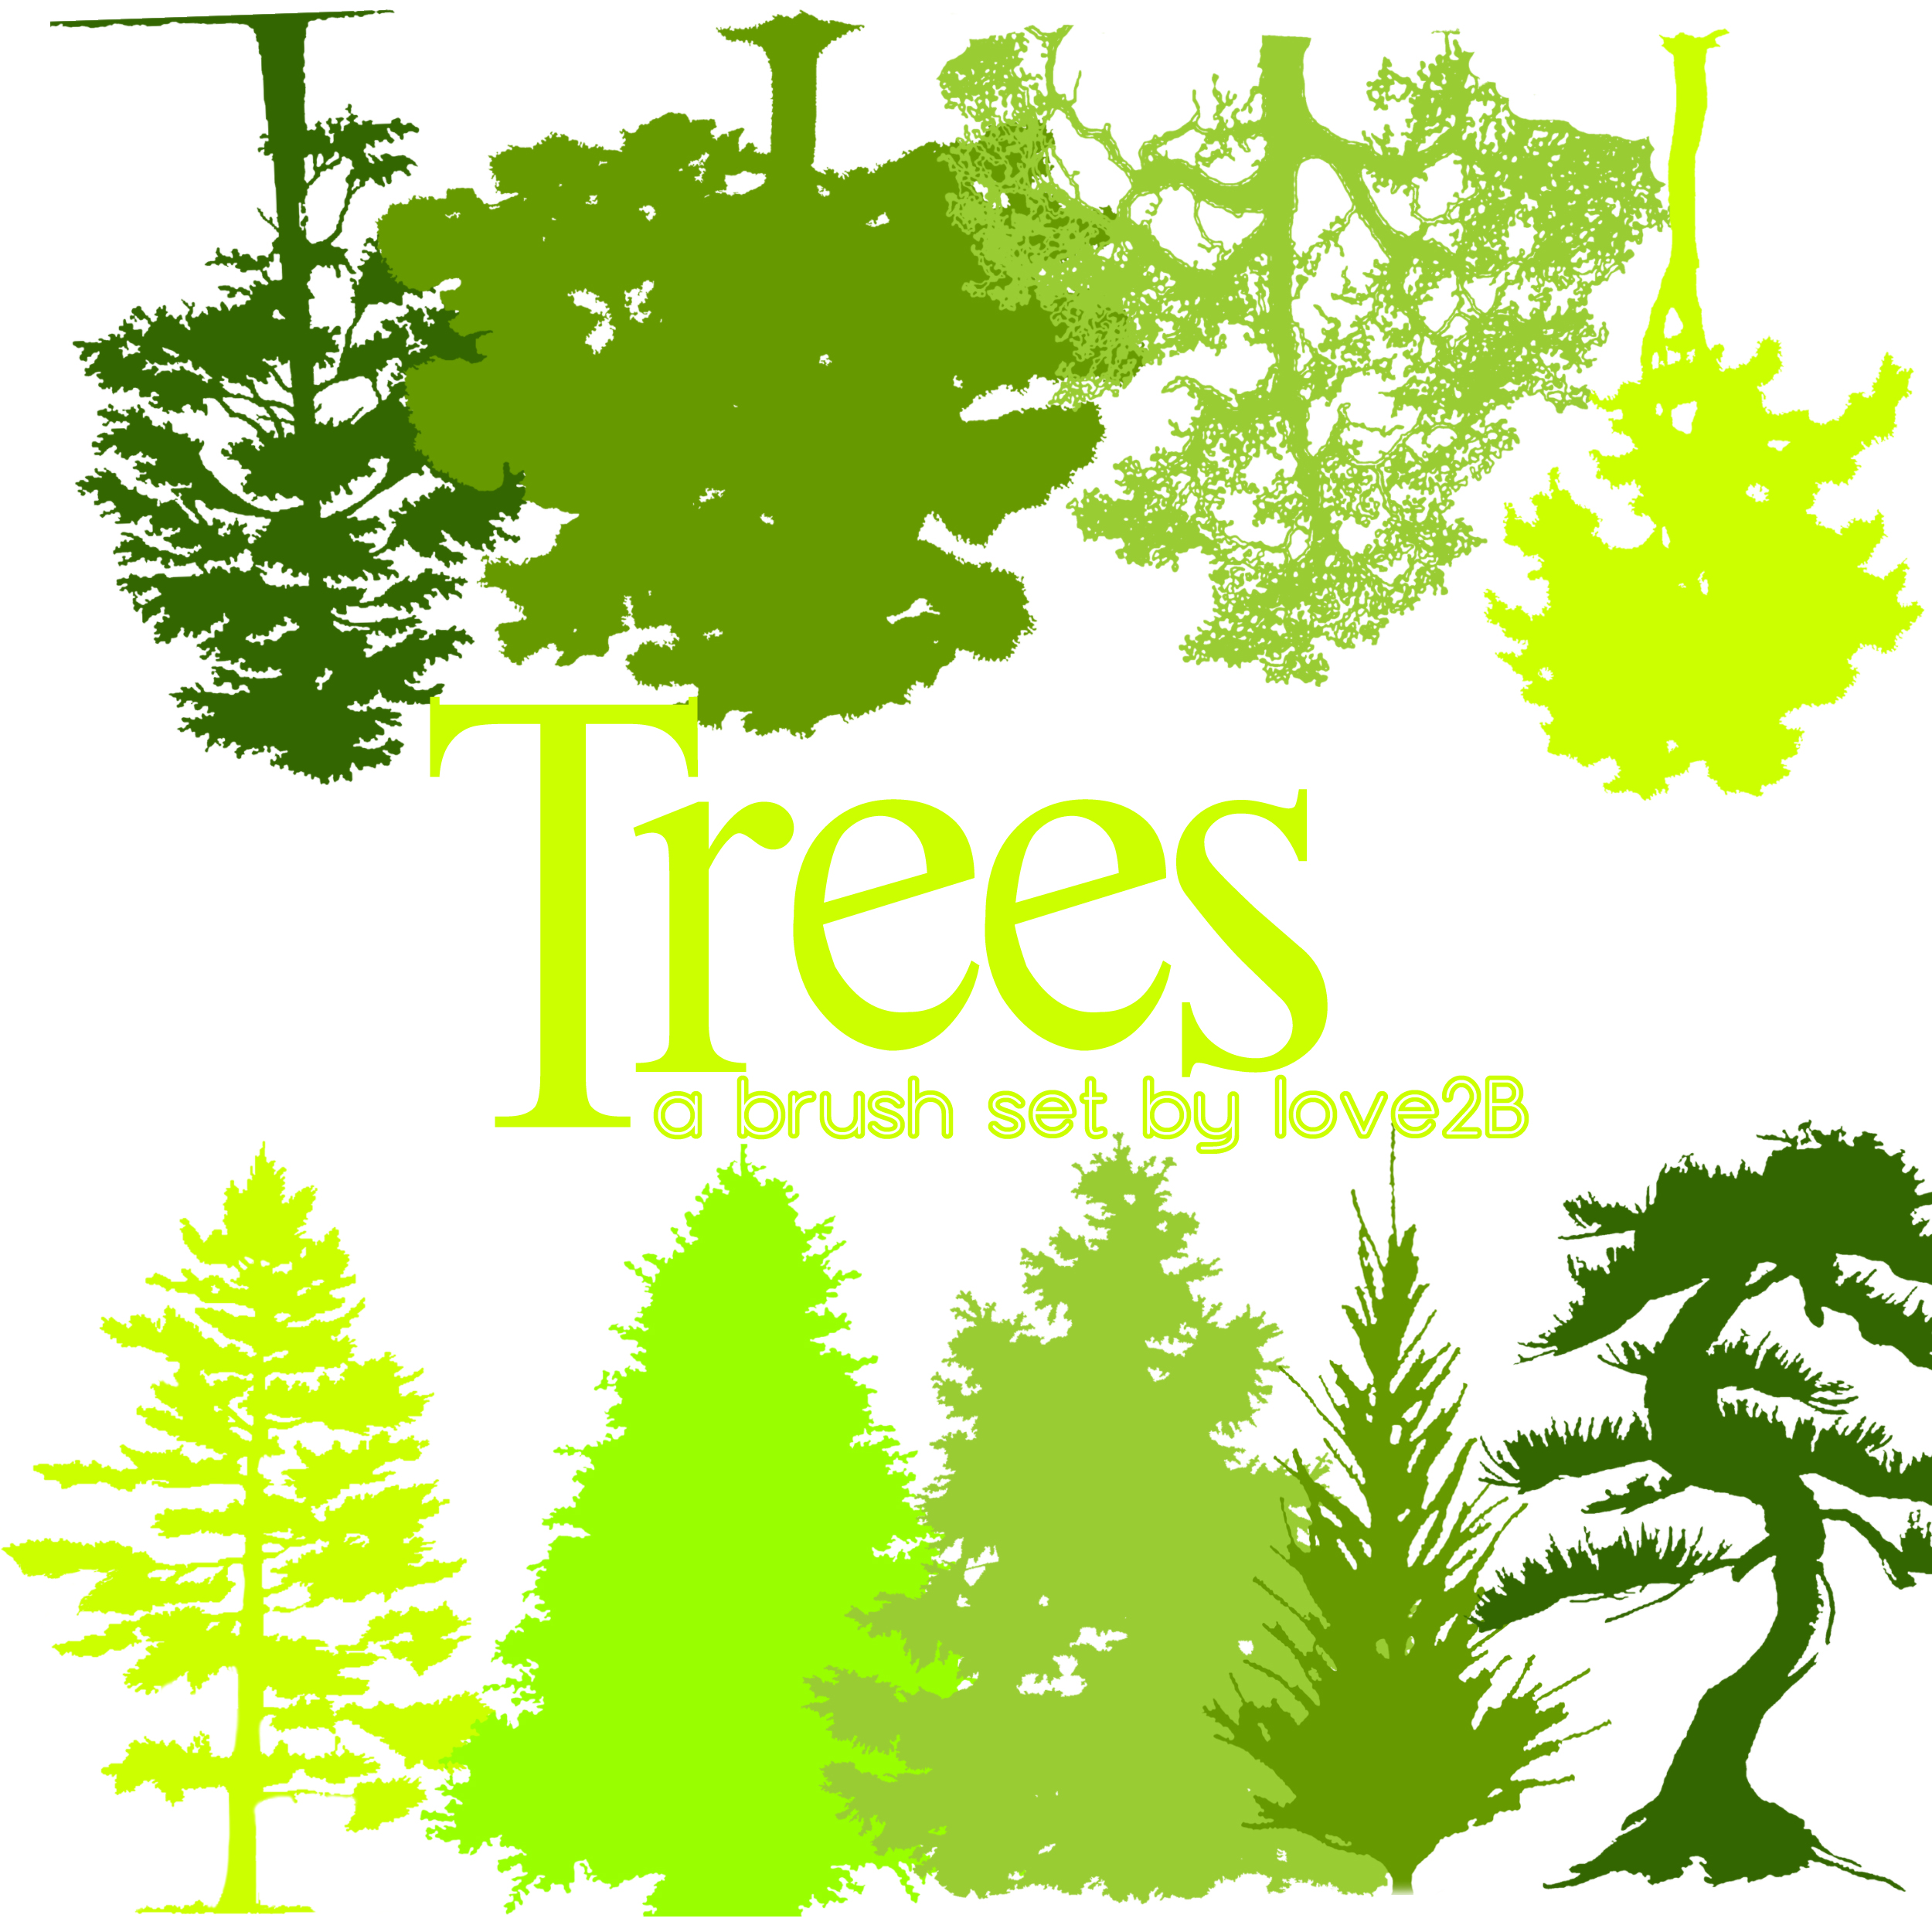 photoshop brushes trees free download